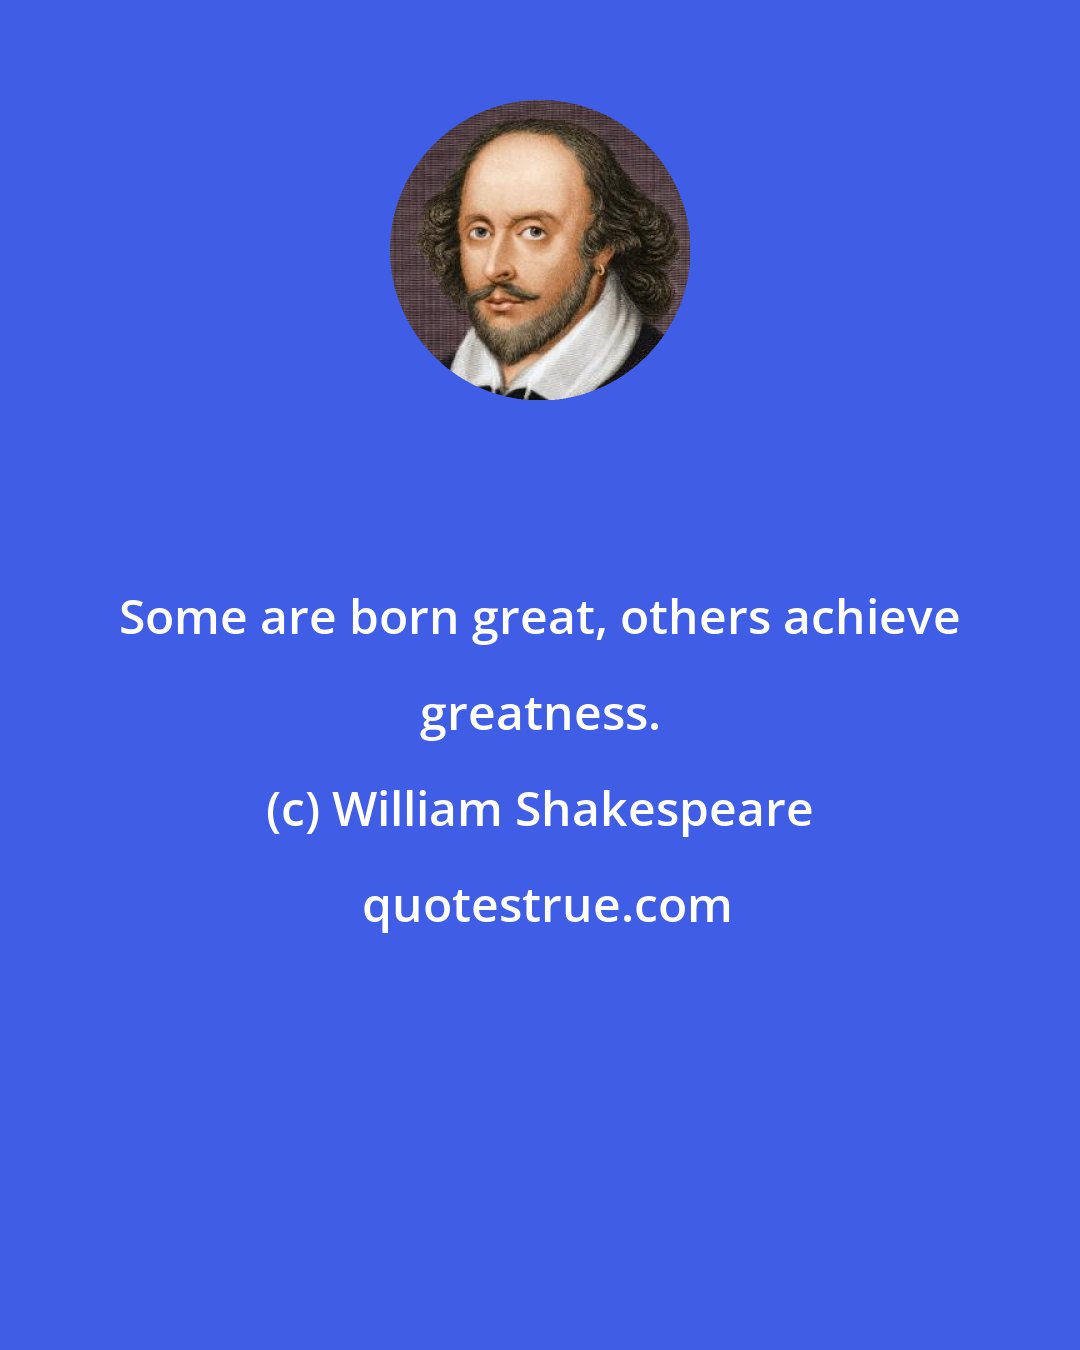 William Shakespeare: Some are born great, others achieve greatness.